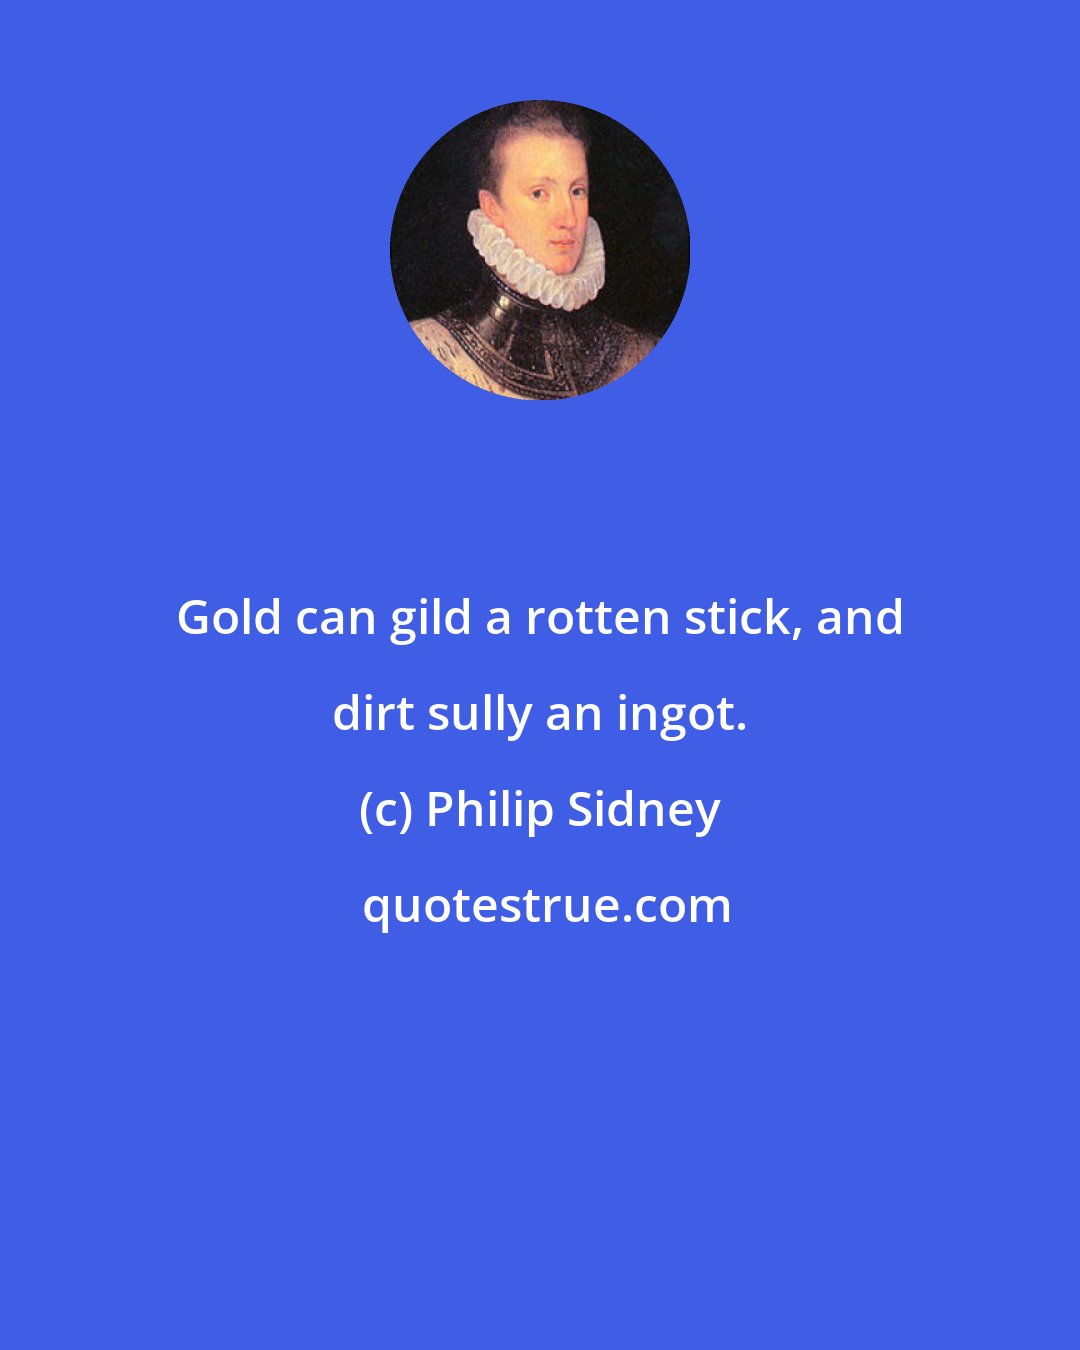 Philip Sidney: Gold can gild a rotten stick, and dirt sully an ingot.